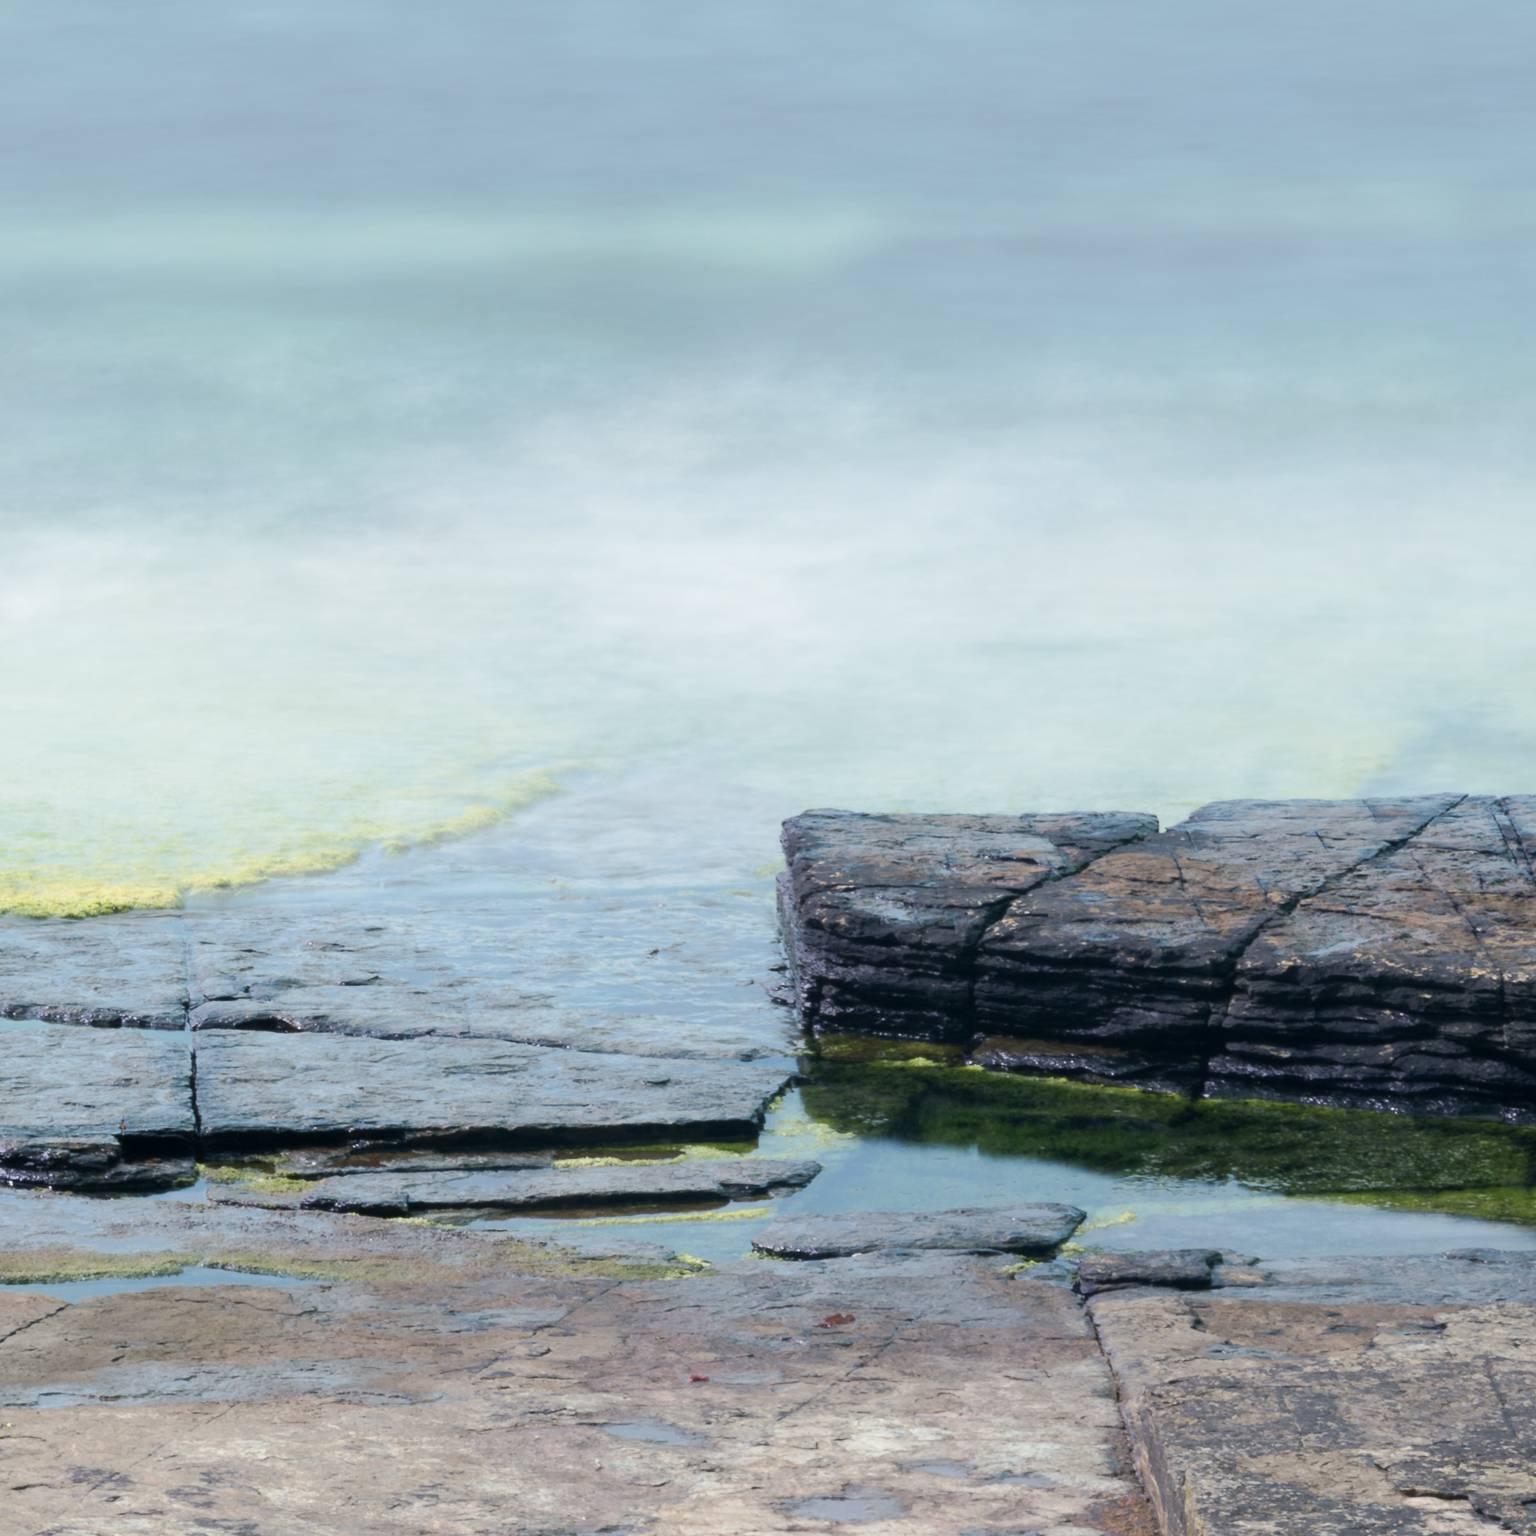 Vicki McKenna's 'Colors of the Sea at Rousay' is a digital file, 7360x4912, of an intimate landscape photograph of the meeting of rock and ocean combining the  subtle browns and greys on the rock with the vibrant blues and greens of the ocean. A